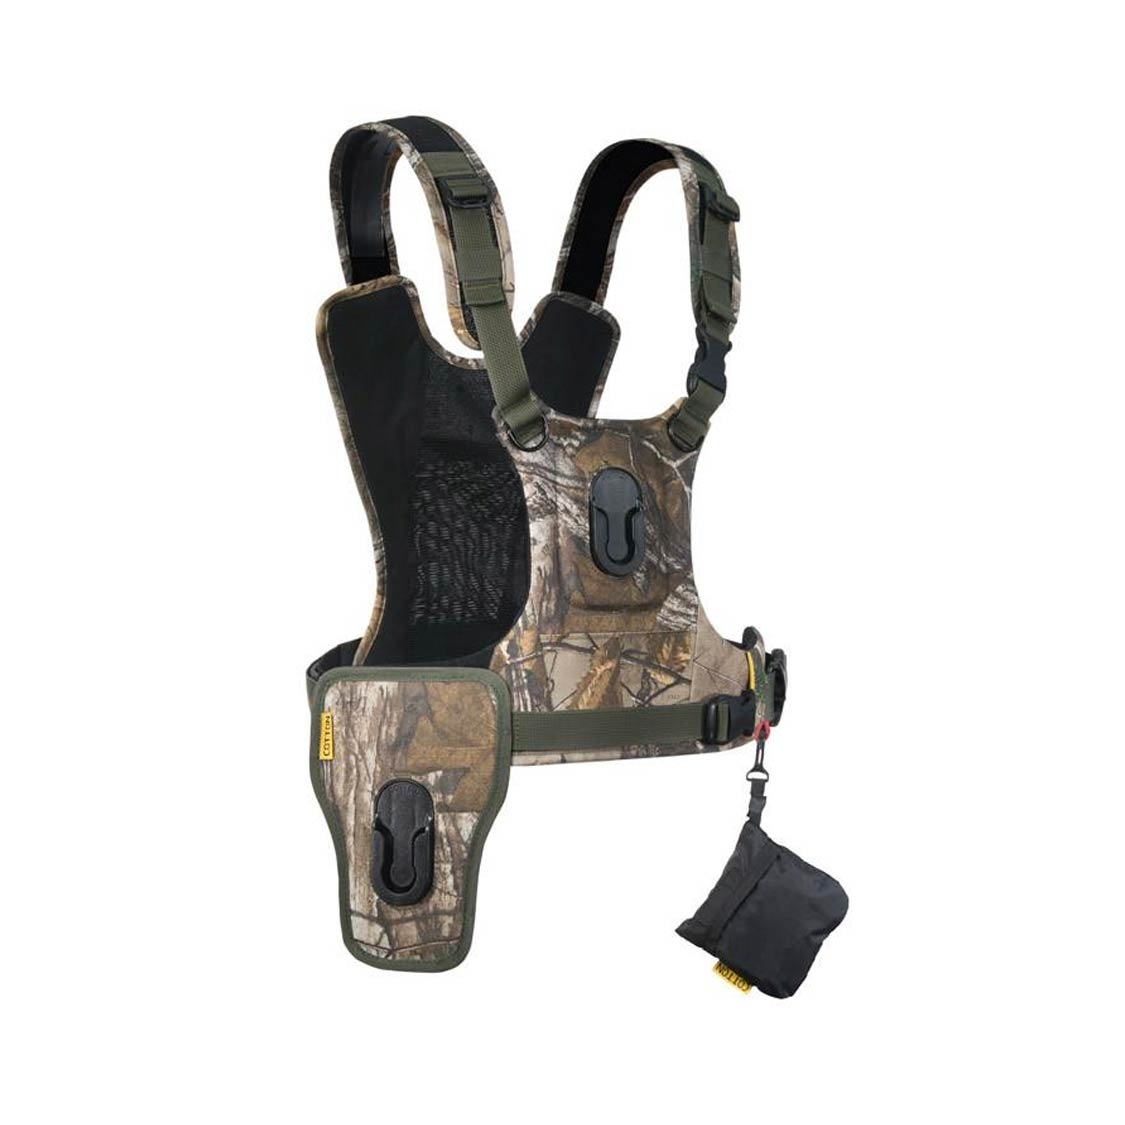 Cotton Carrier G3 Harness 2 (camo)